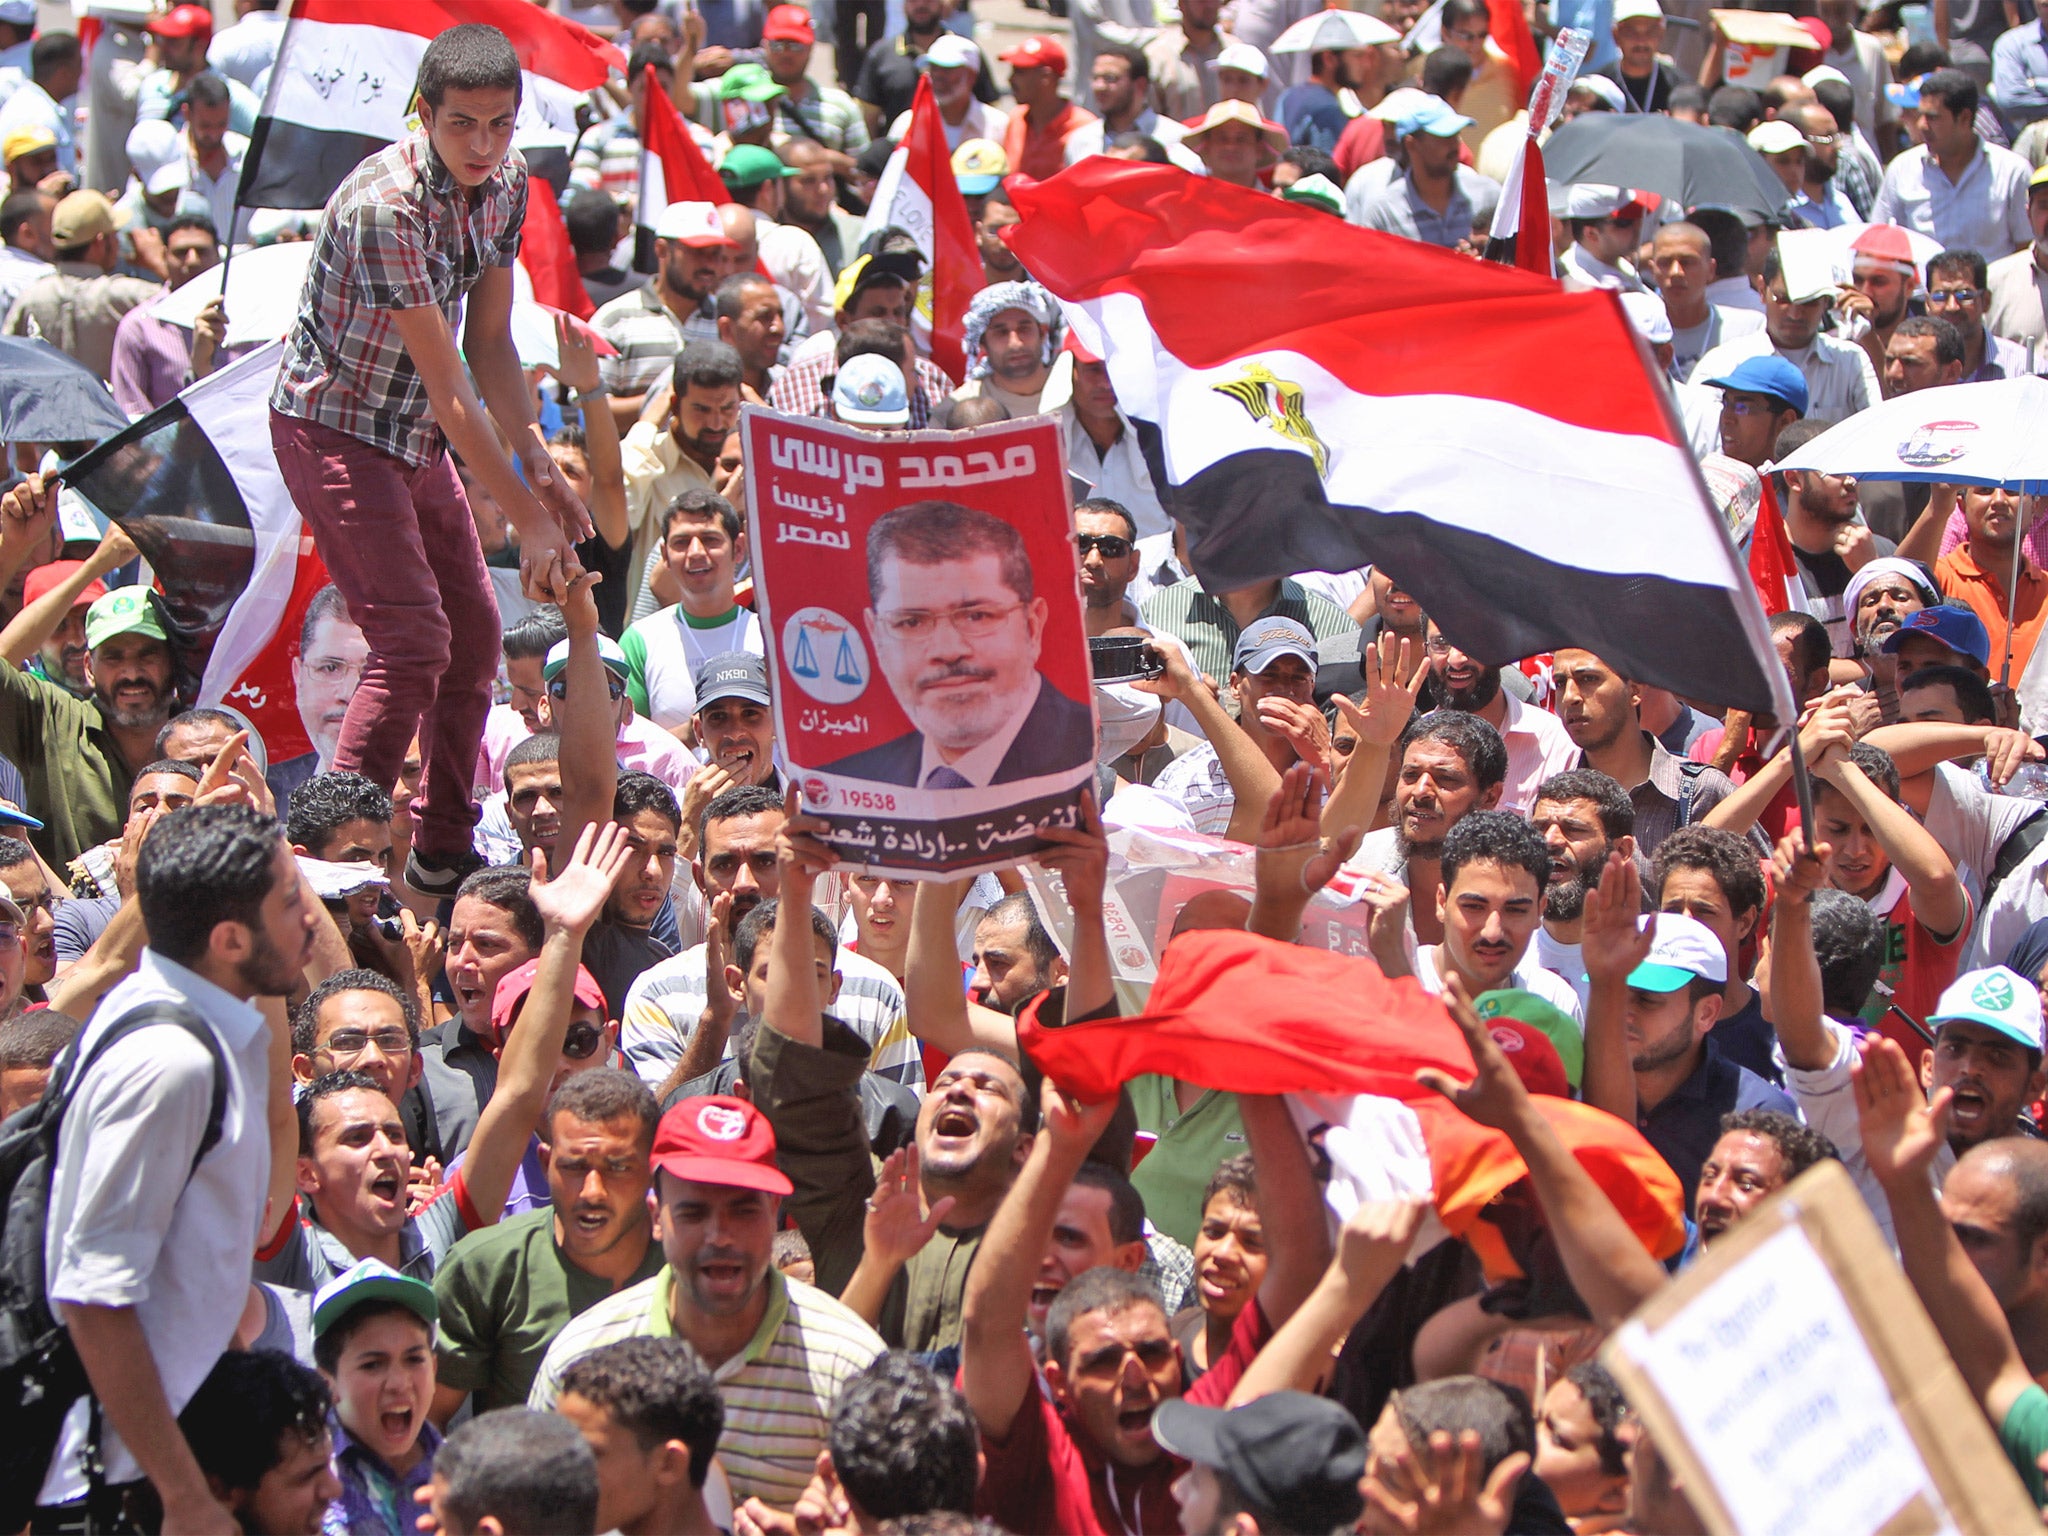 Most victims of last year’s crackdown in Egypt were Muslim Brotherhood supporters